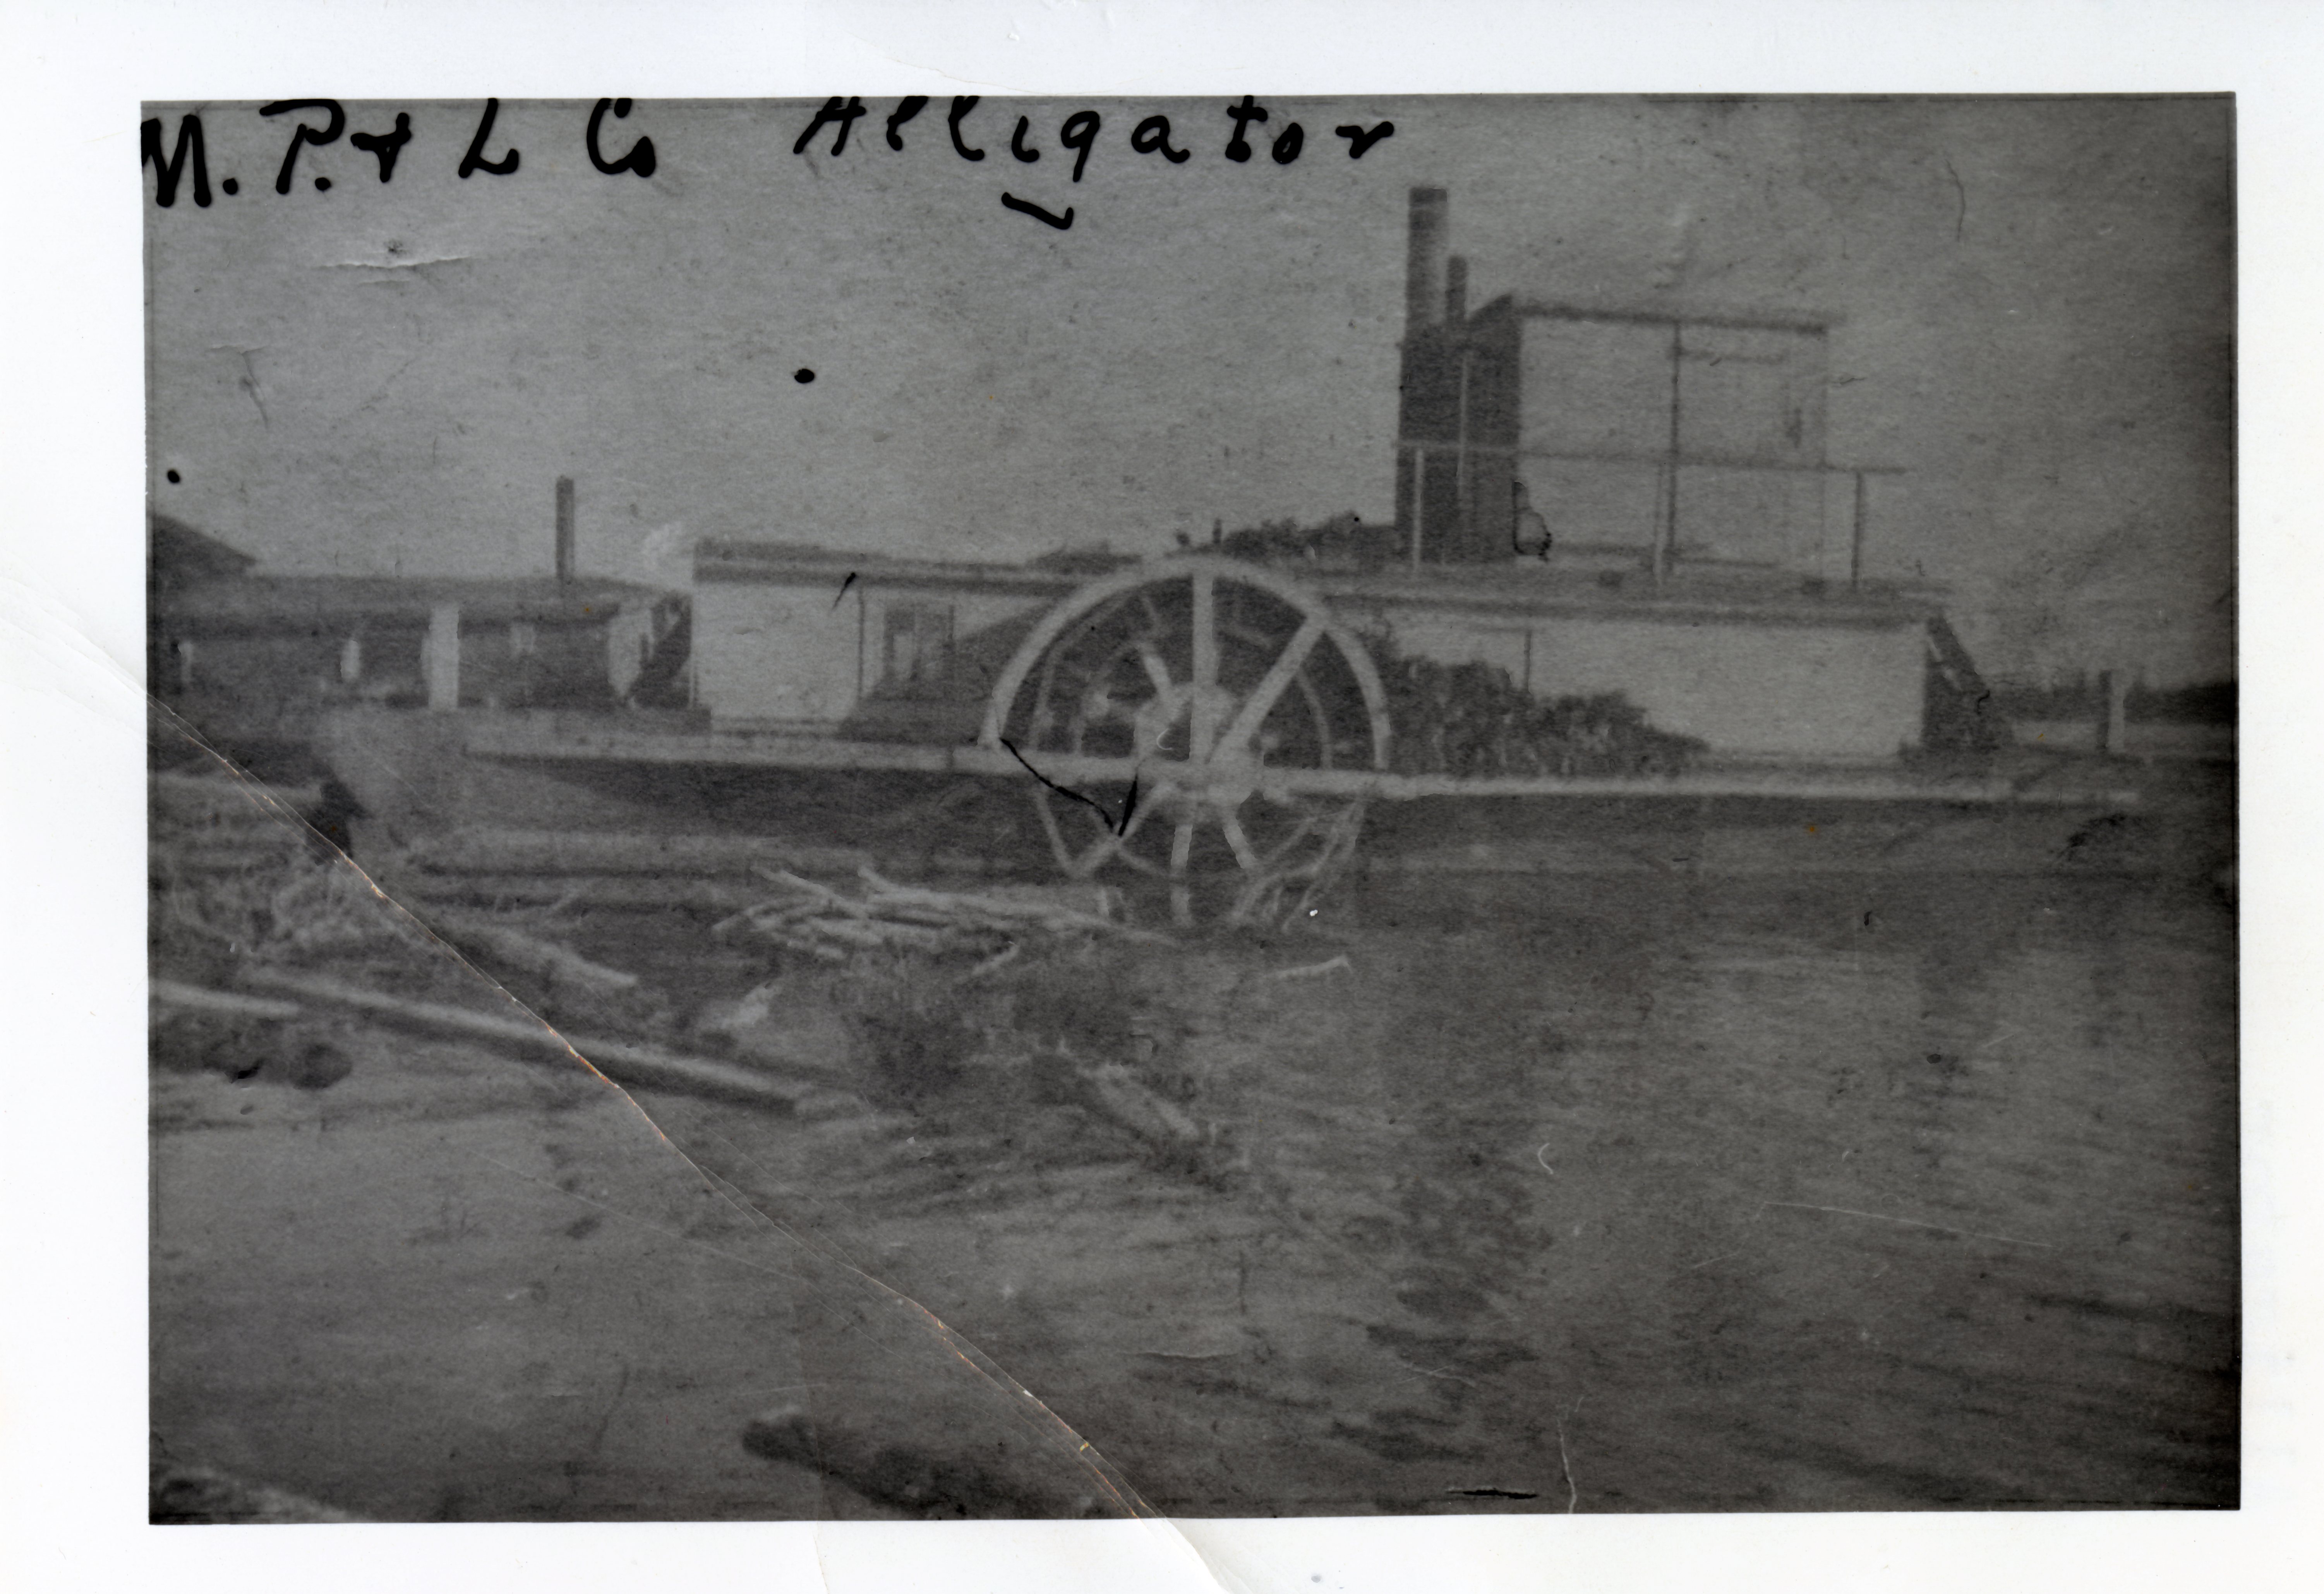 Poor quality black-and-white photograph of a docked steamboat. On the shores, a building and logs are floating on the water.